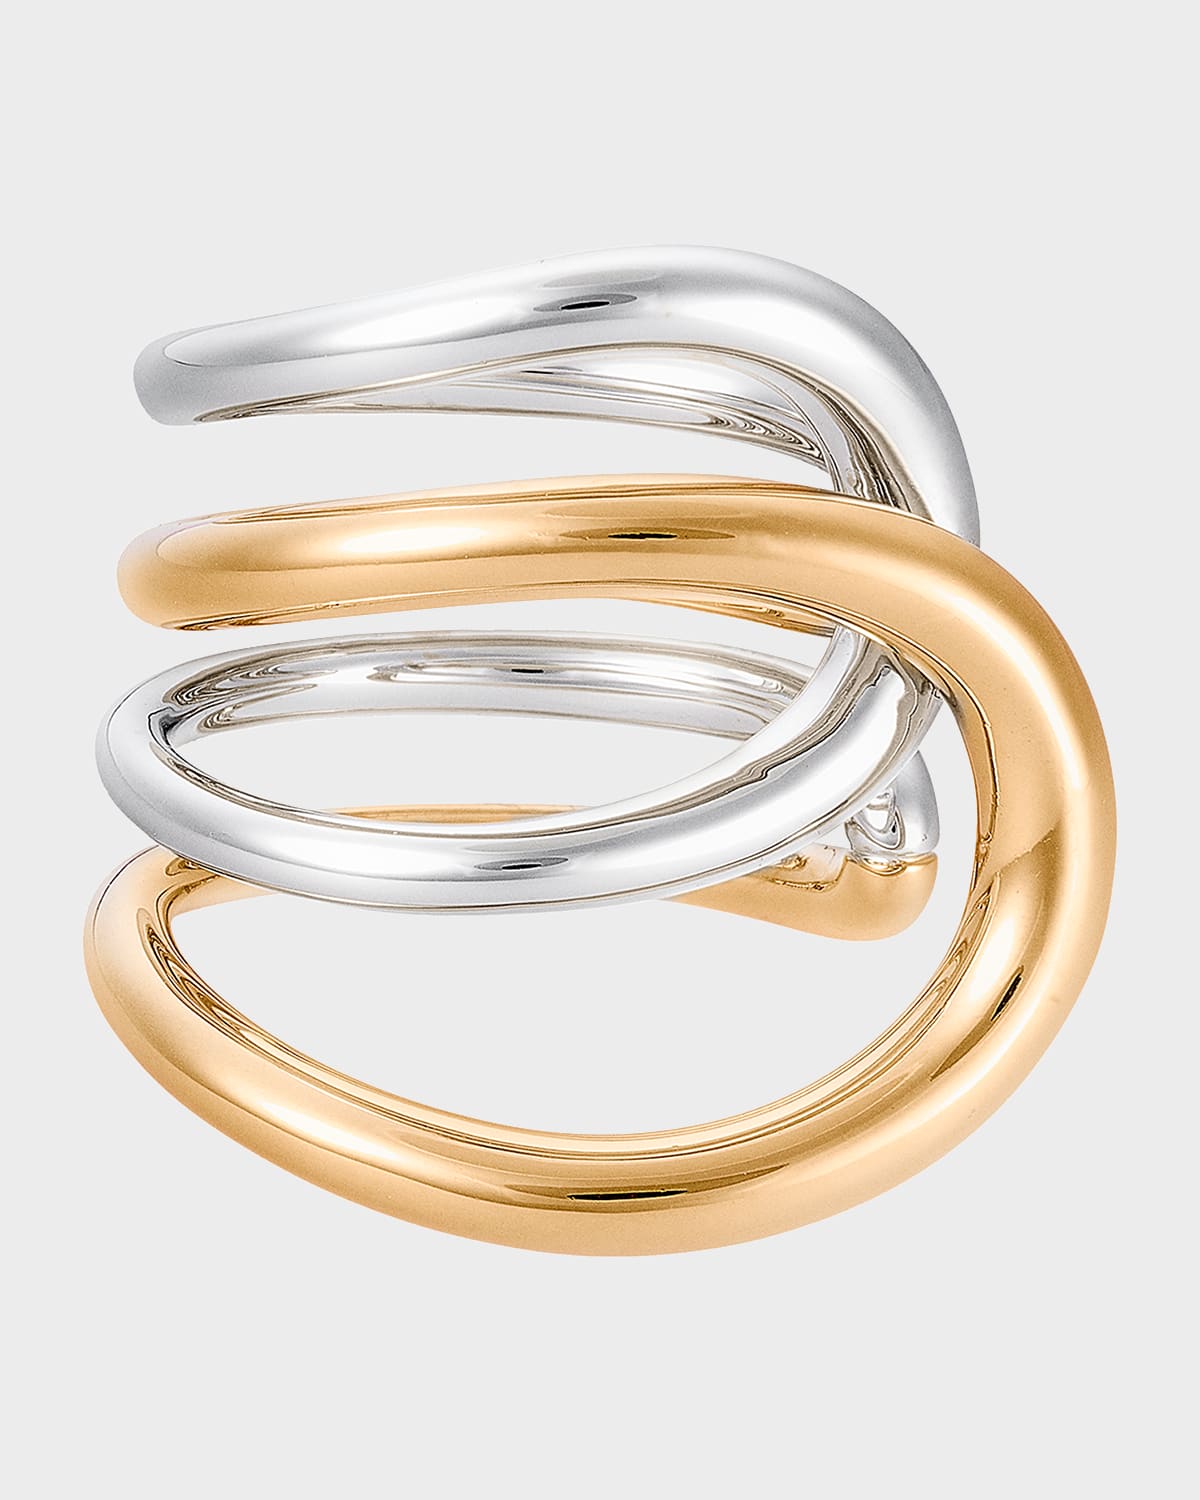 CHARLOTTE CHESNAIS DAISY BICOLOR RING IN GOLD VERMEIL AND SILVER